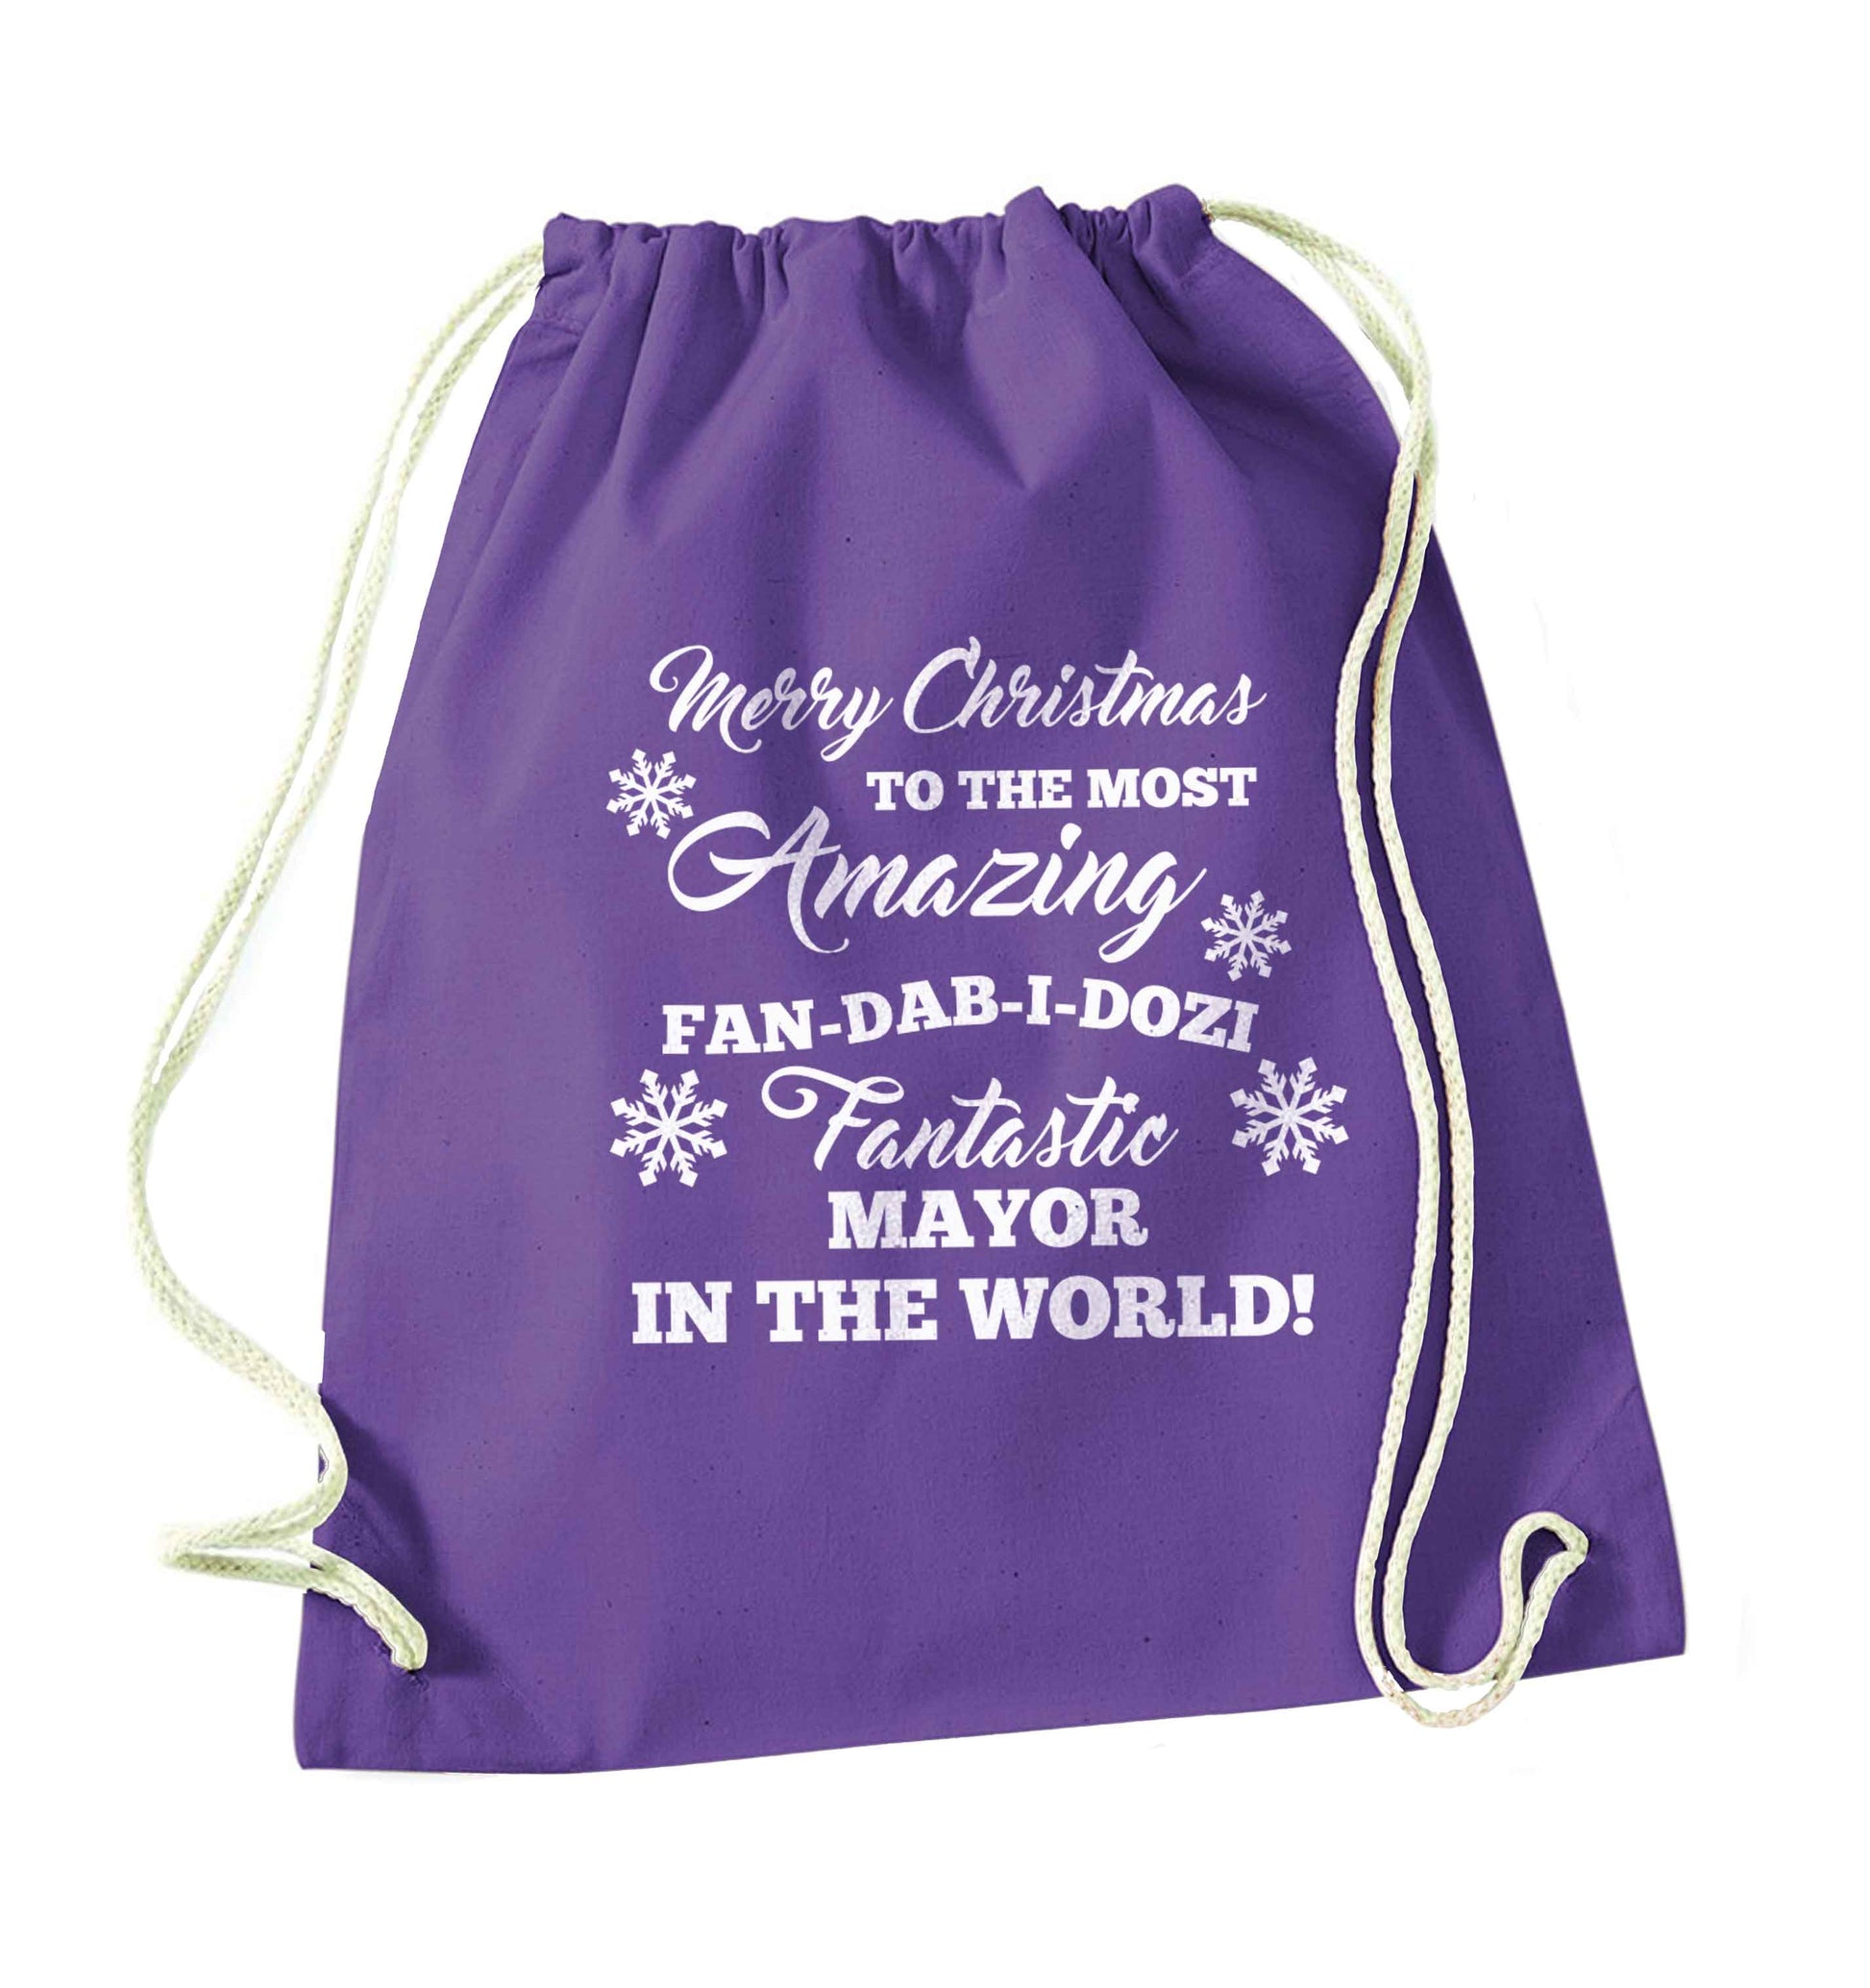 Merry Christmas to the most amazing fireman in the world! purple drawstring bag